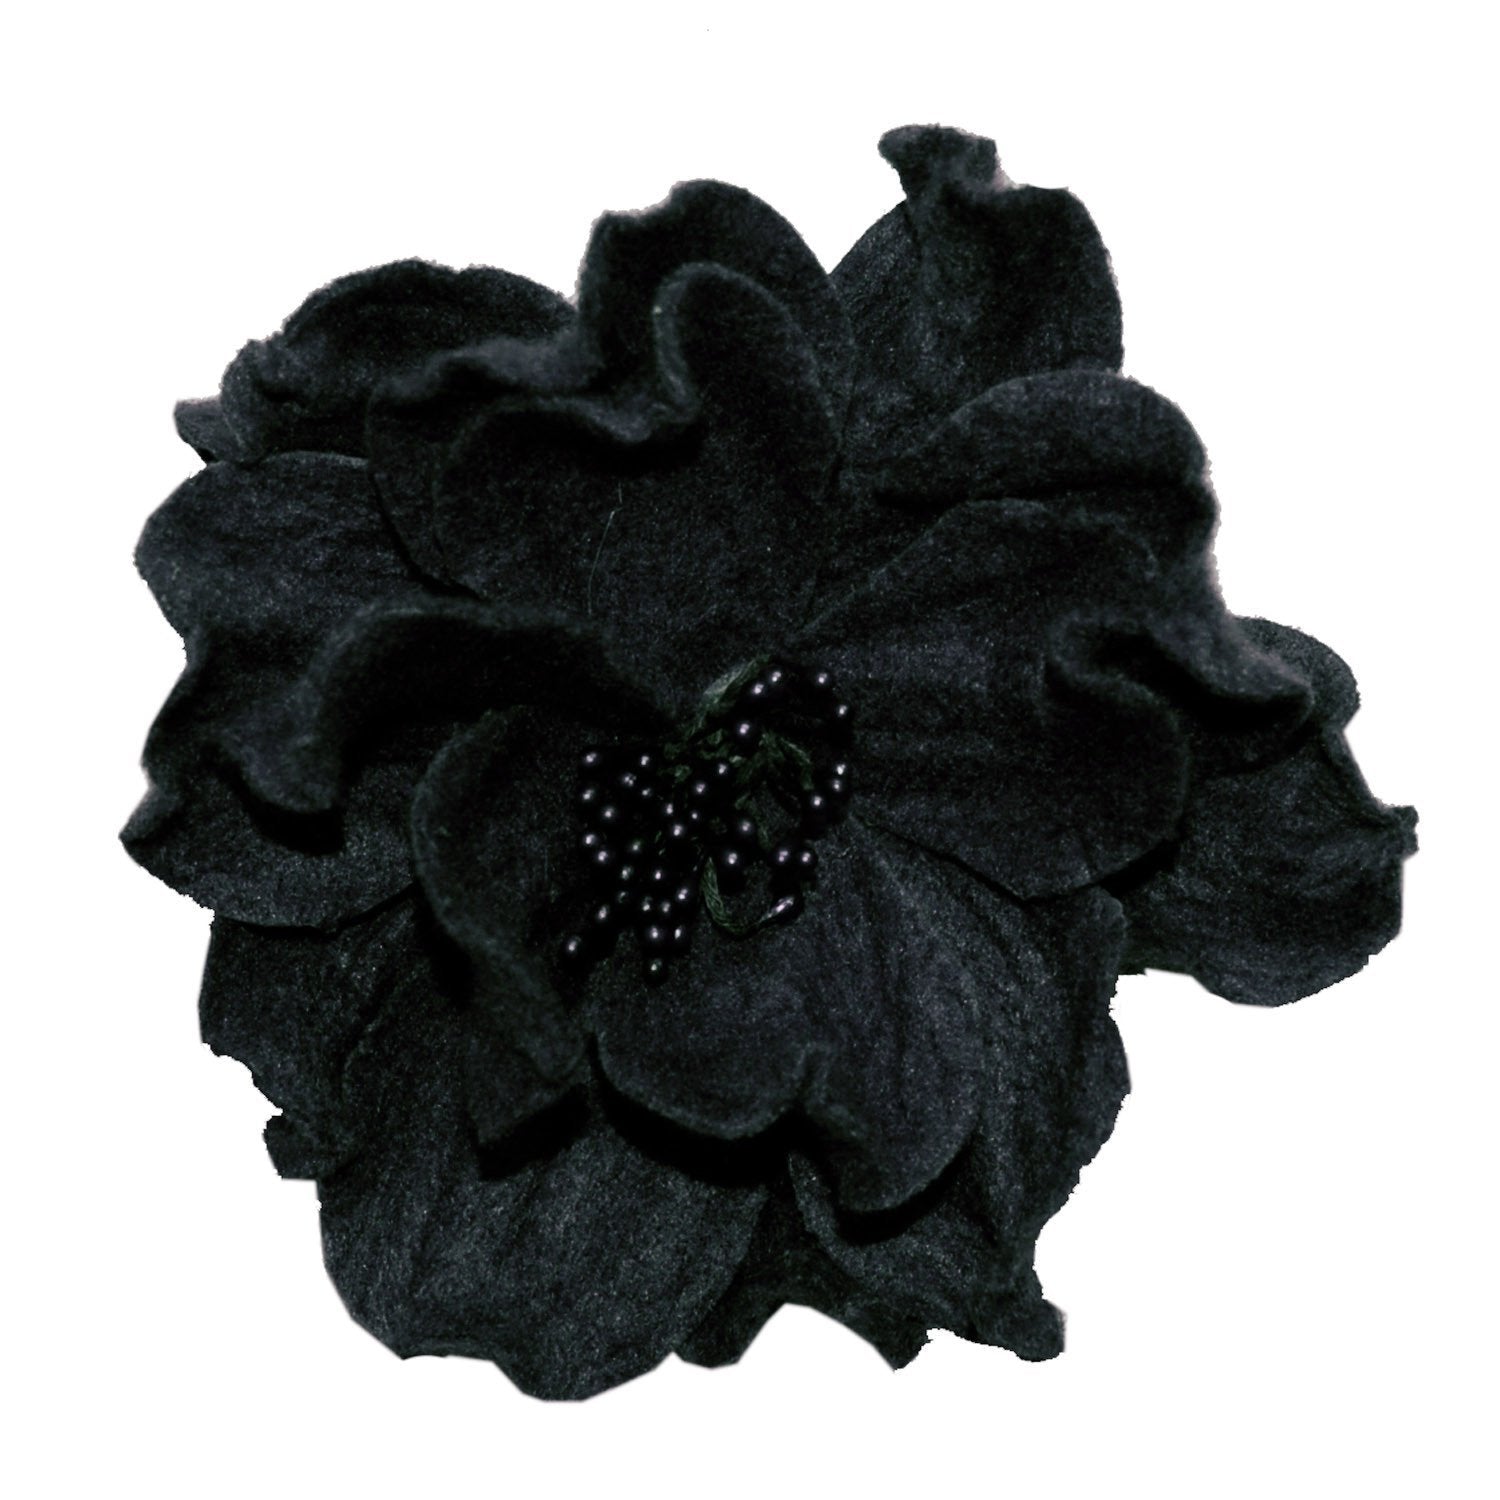 Flower Brooches - Pandemonium Millinery Faux Fur Boutique made in Seattle  WA USA